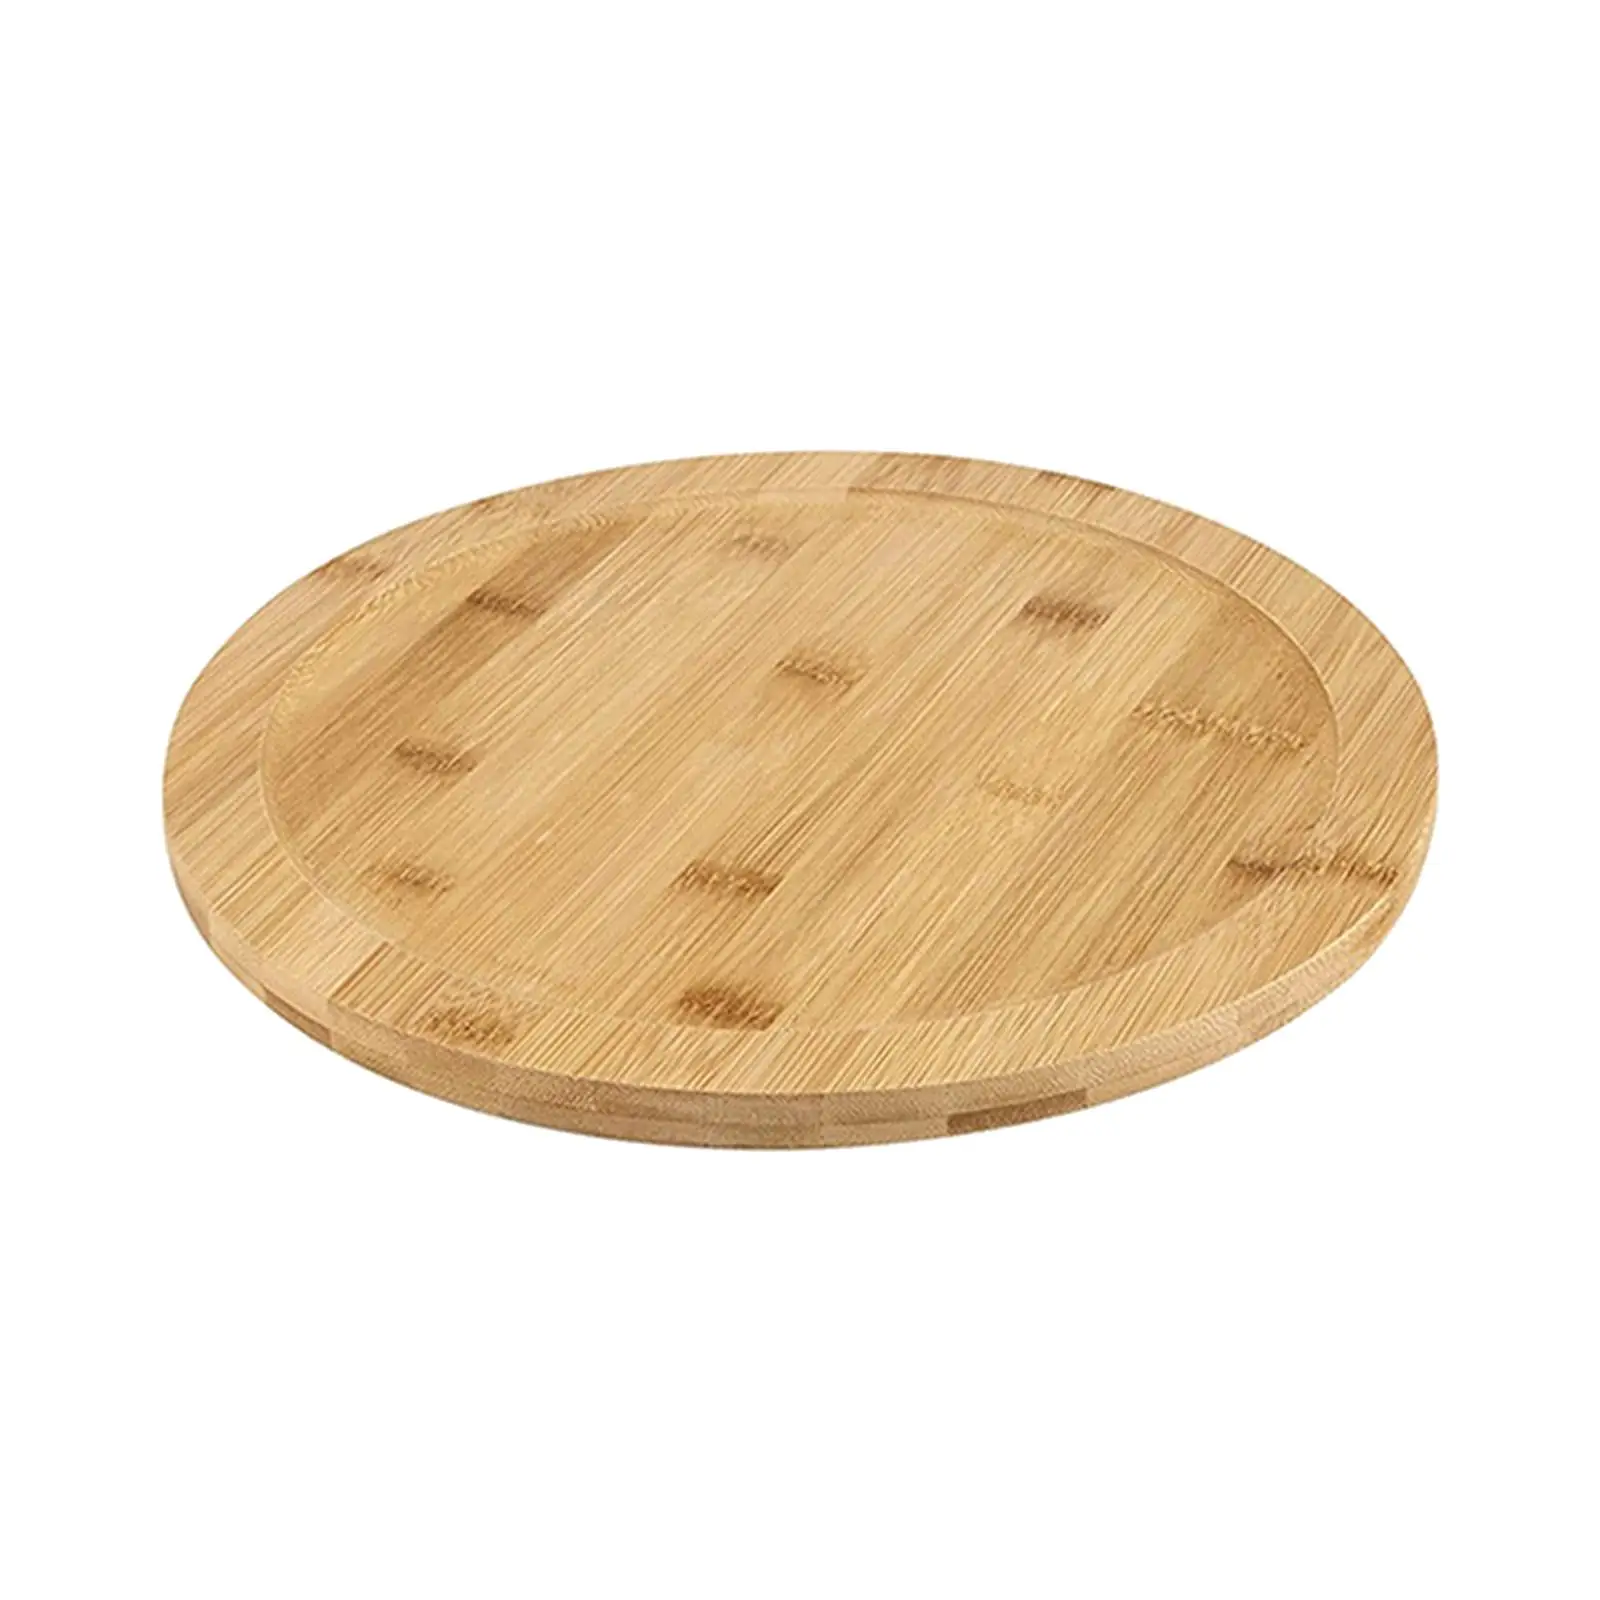 Serving Plate Pizza Serving Board Rotating Board Wooden Turntable Rotating Base for Home Dining Table Pantry Cabinet Kitchen